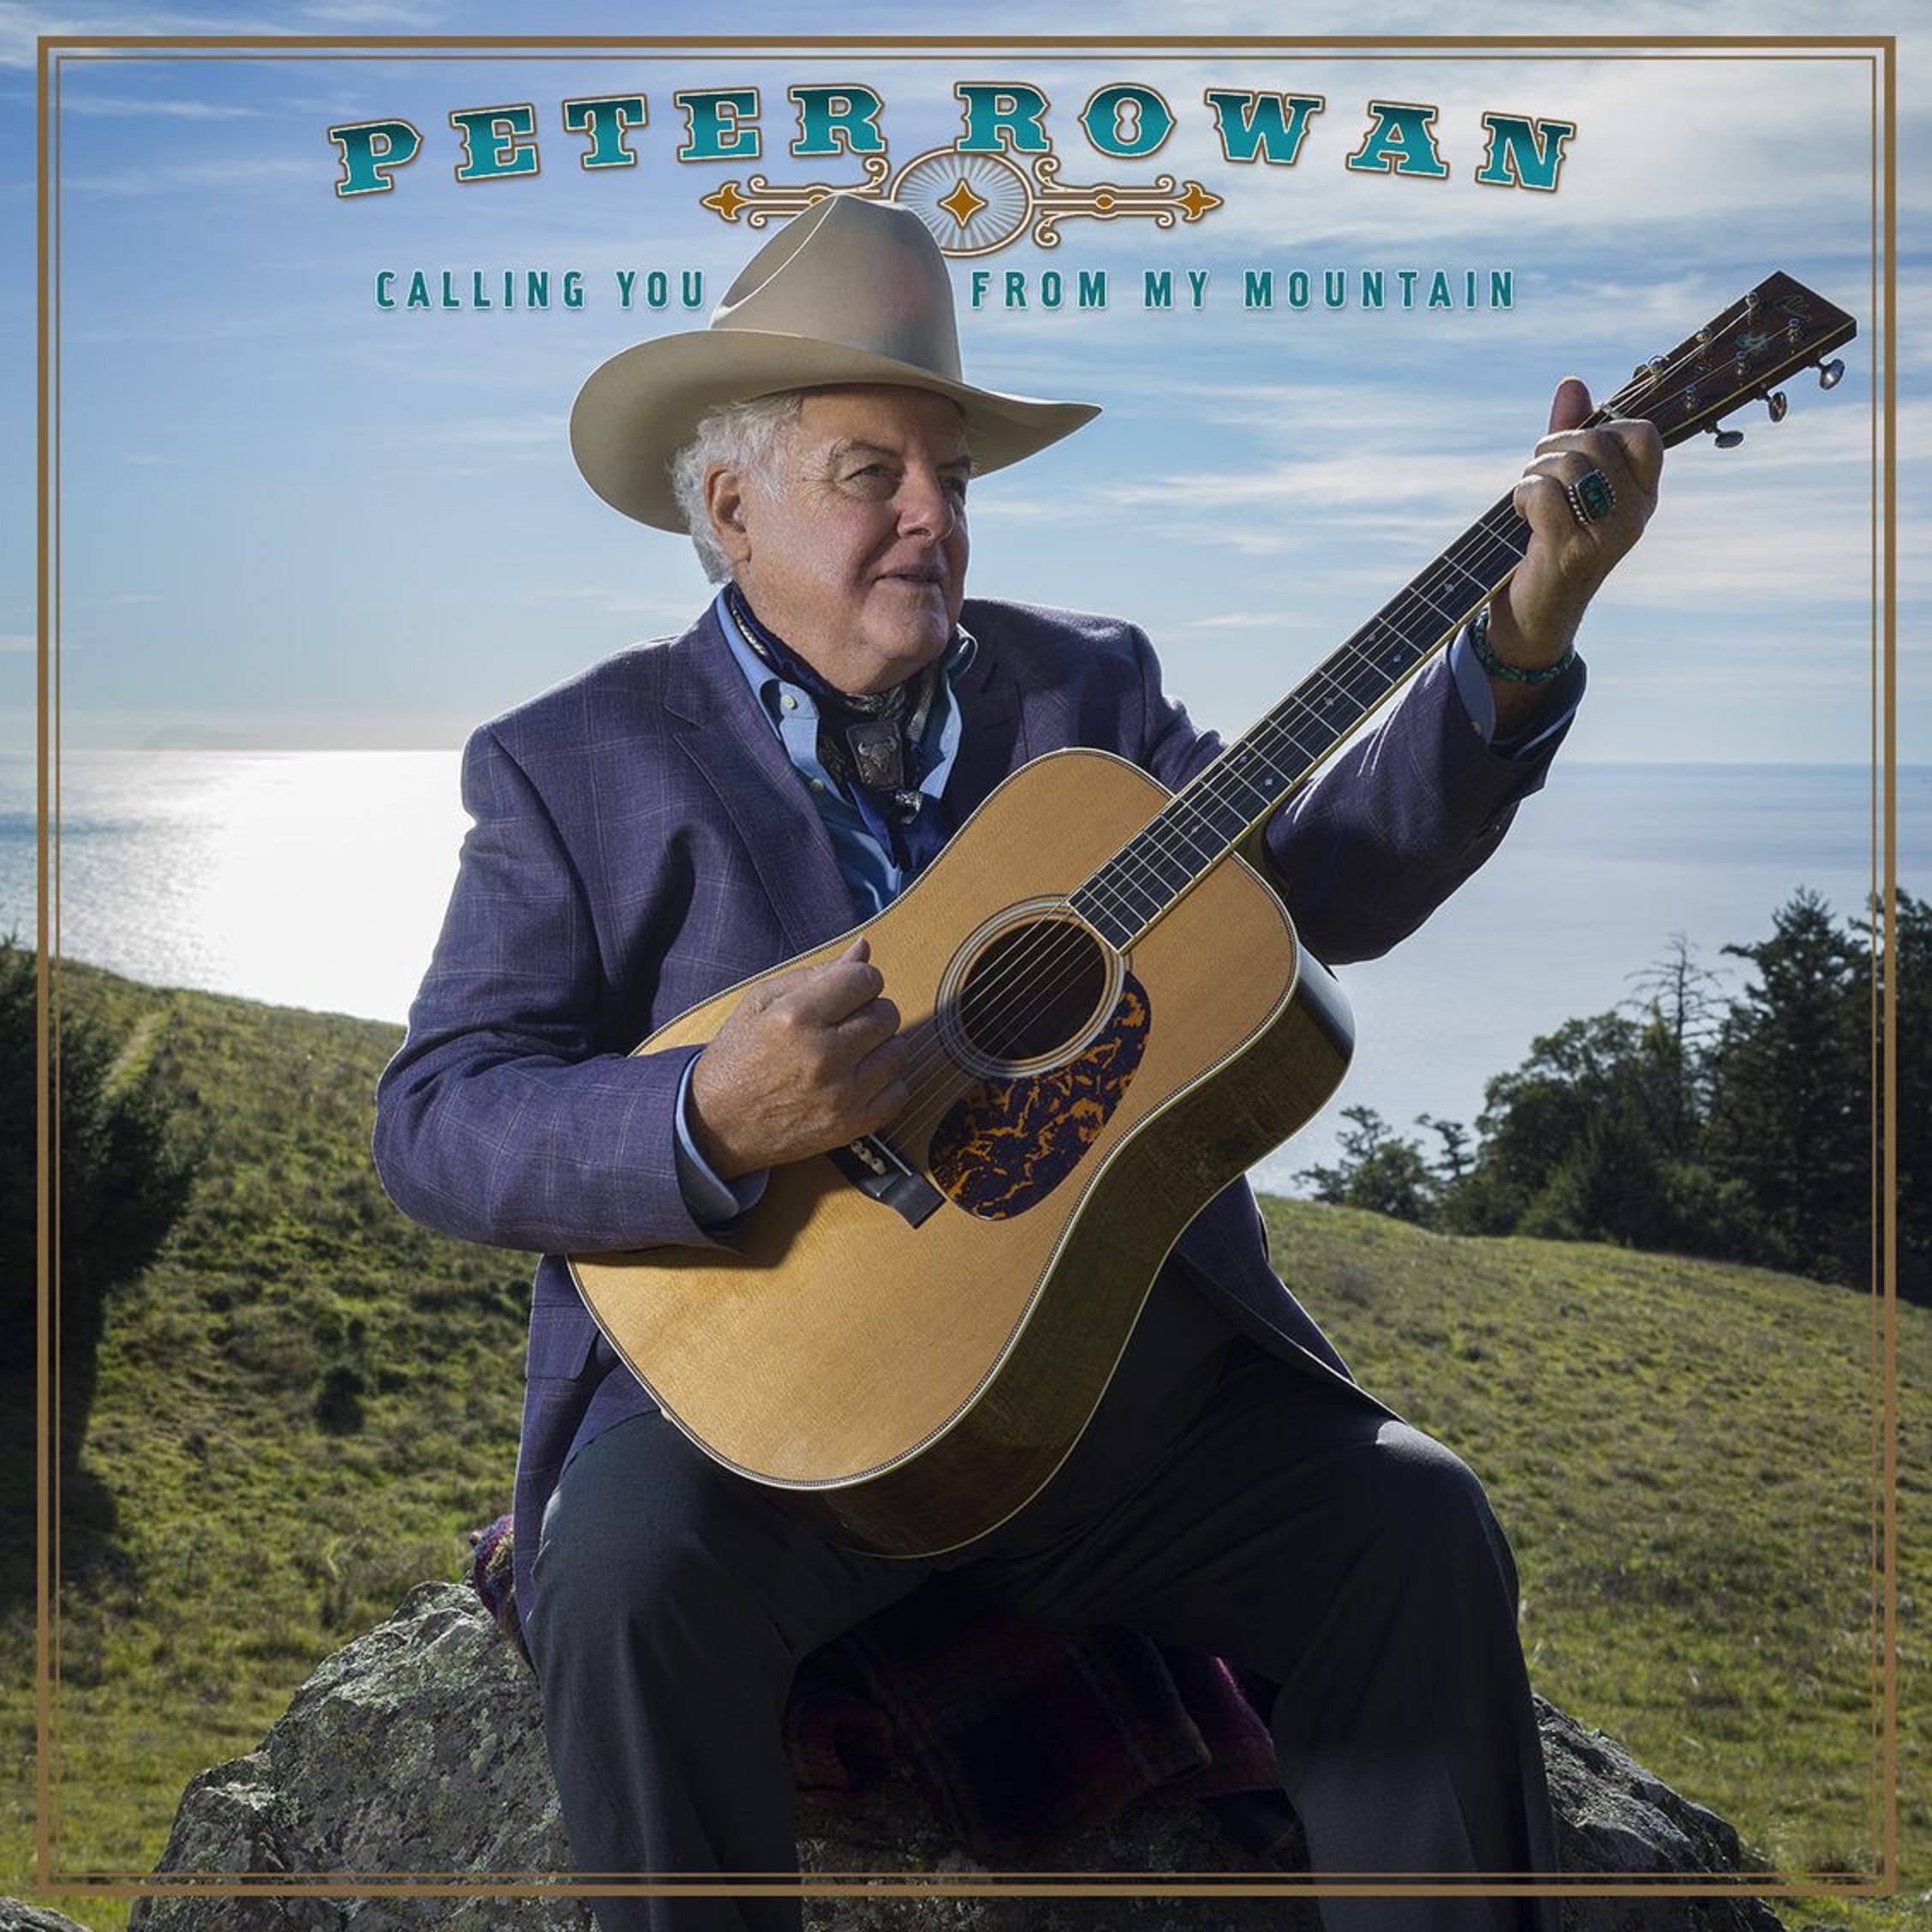 Peter Rowan releases new album feat. Billy Strings, Shawn Camp, Molly Tuttle, and more